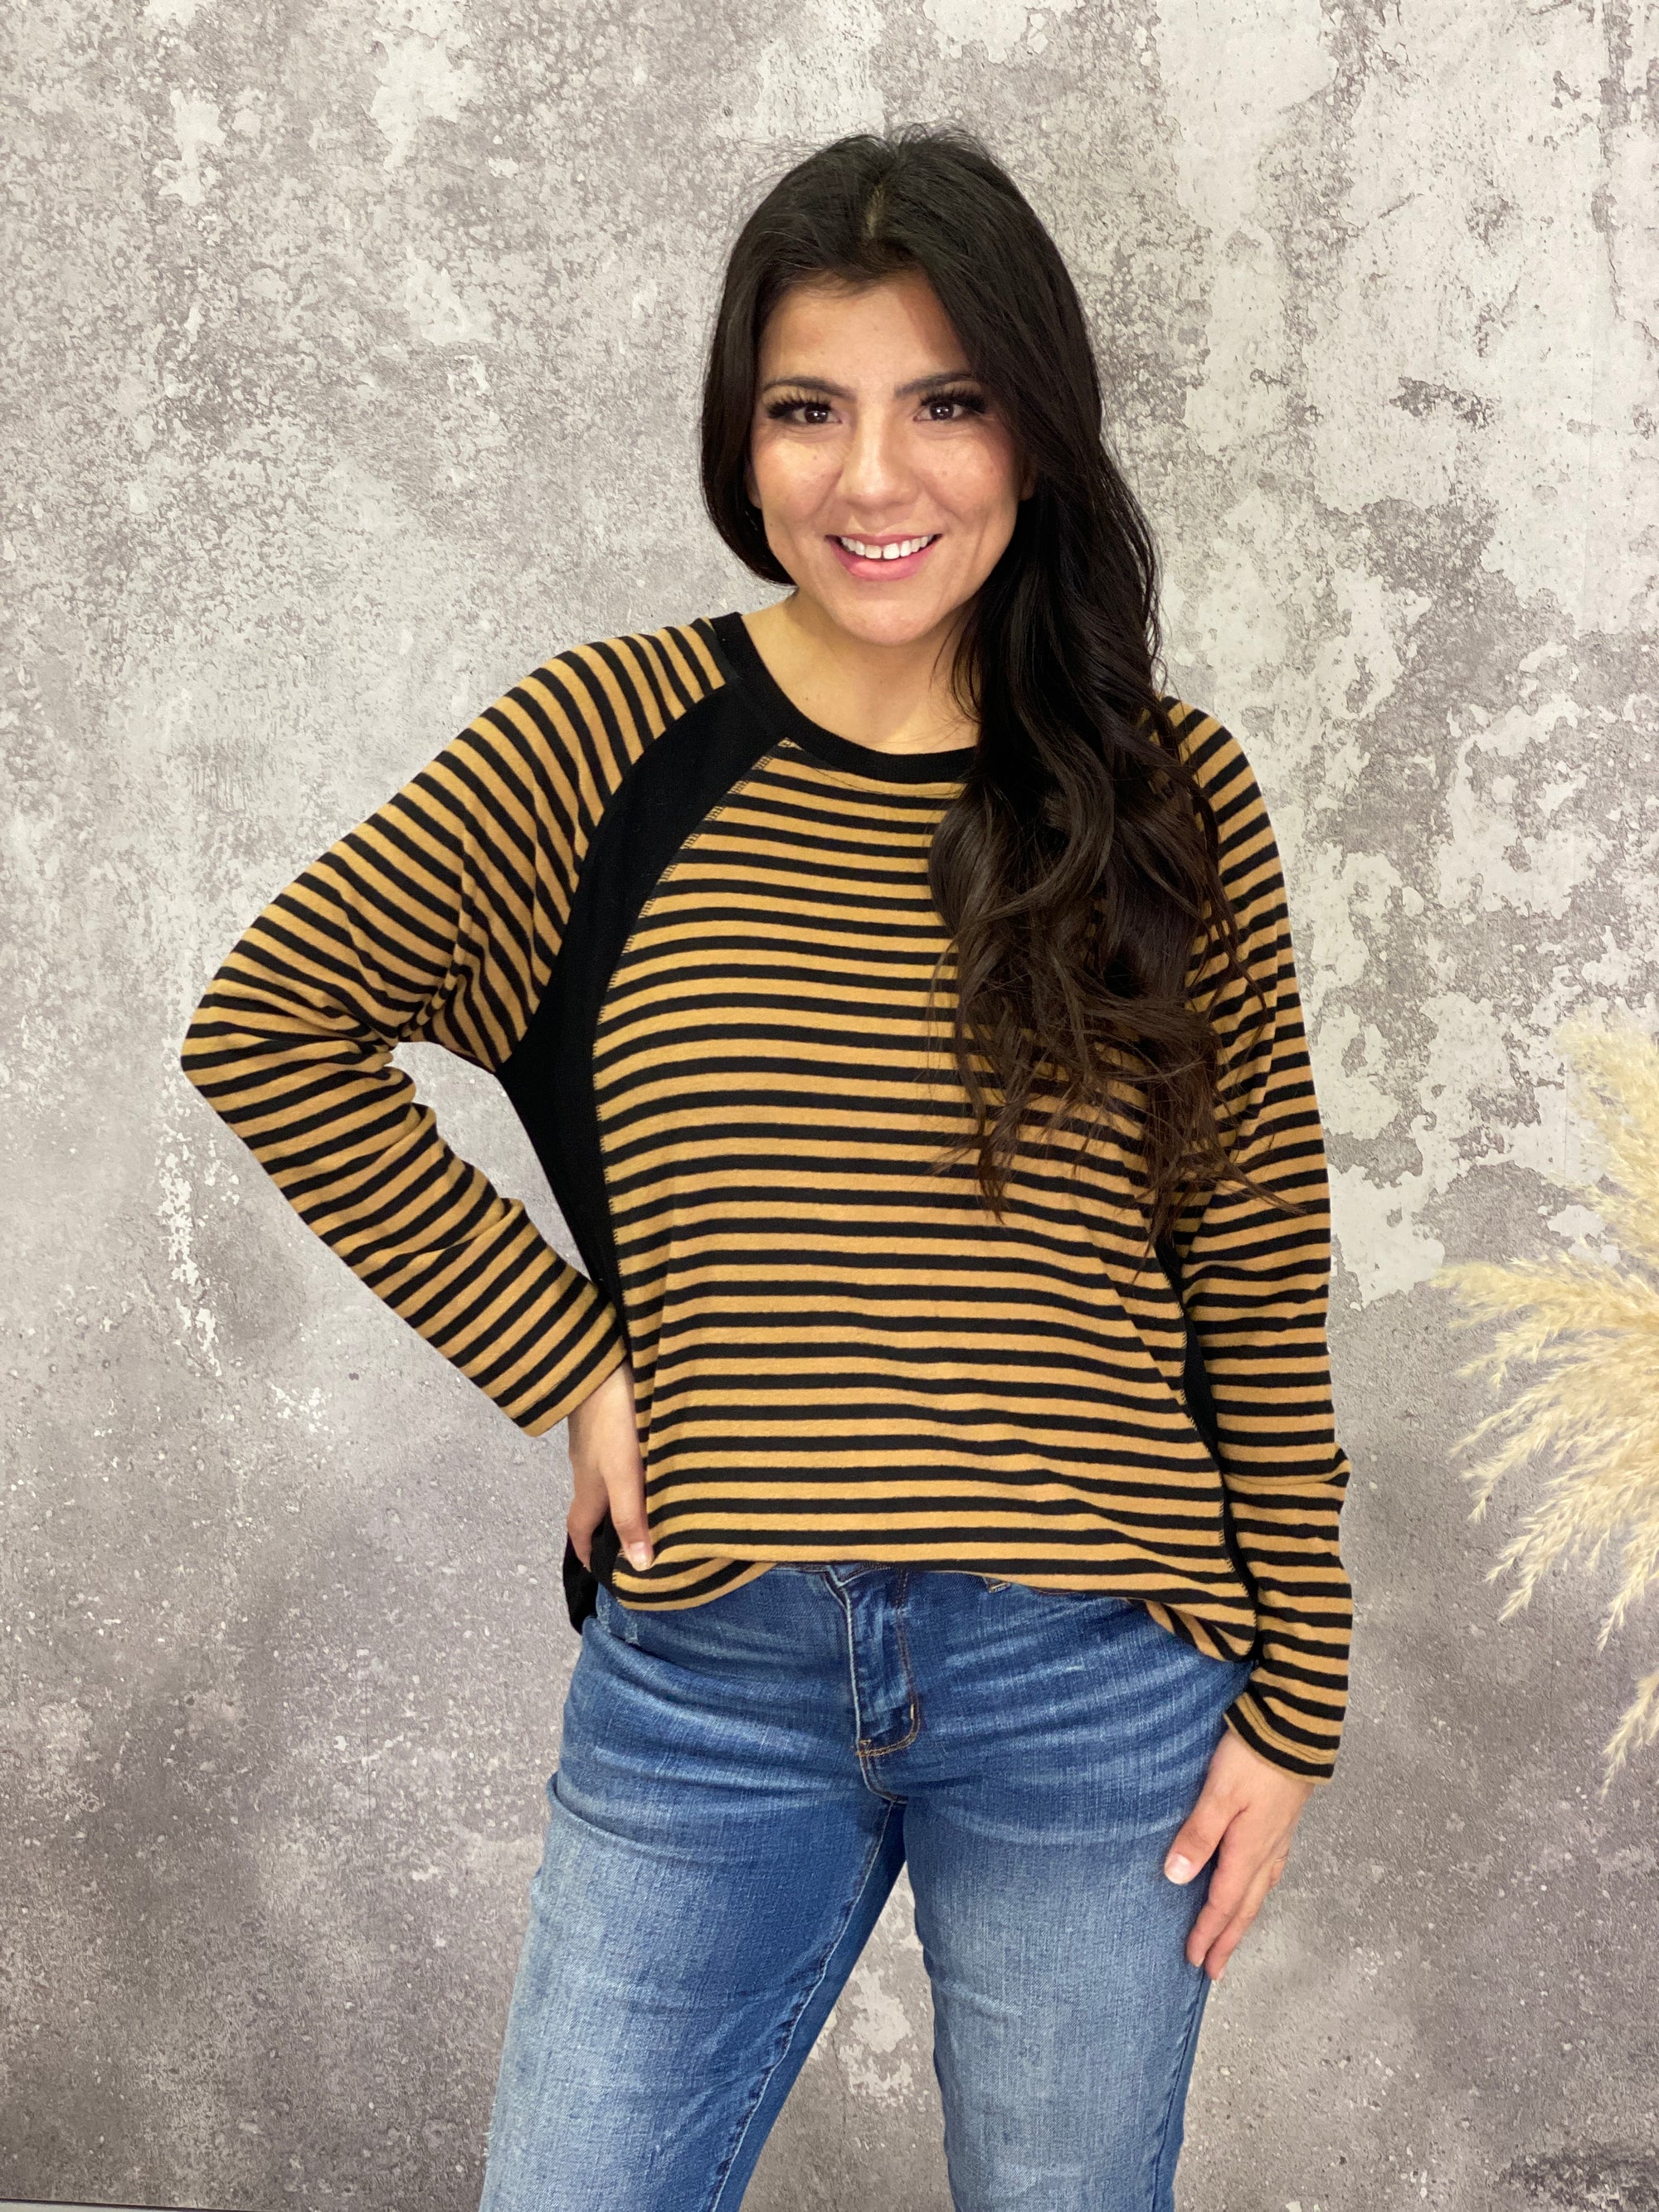 Super Soft Striped Camel and Black Top (Small - 3X) - FINAL SALE